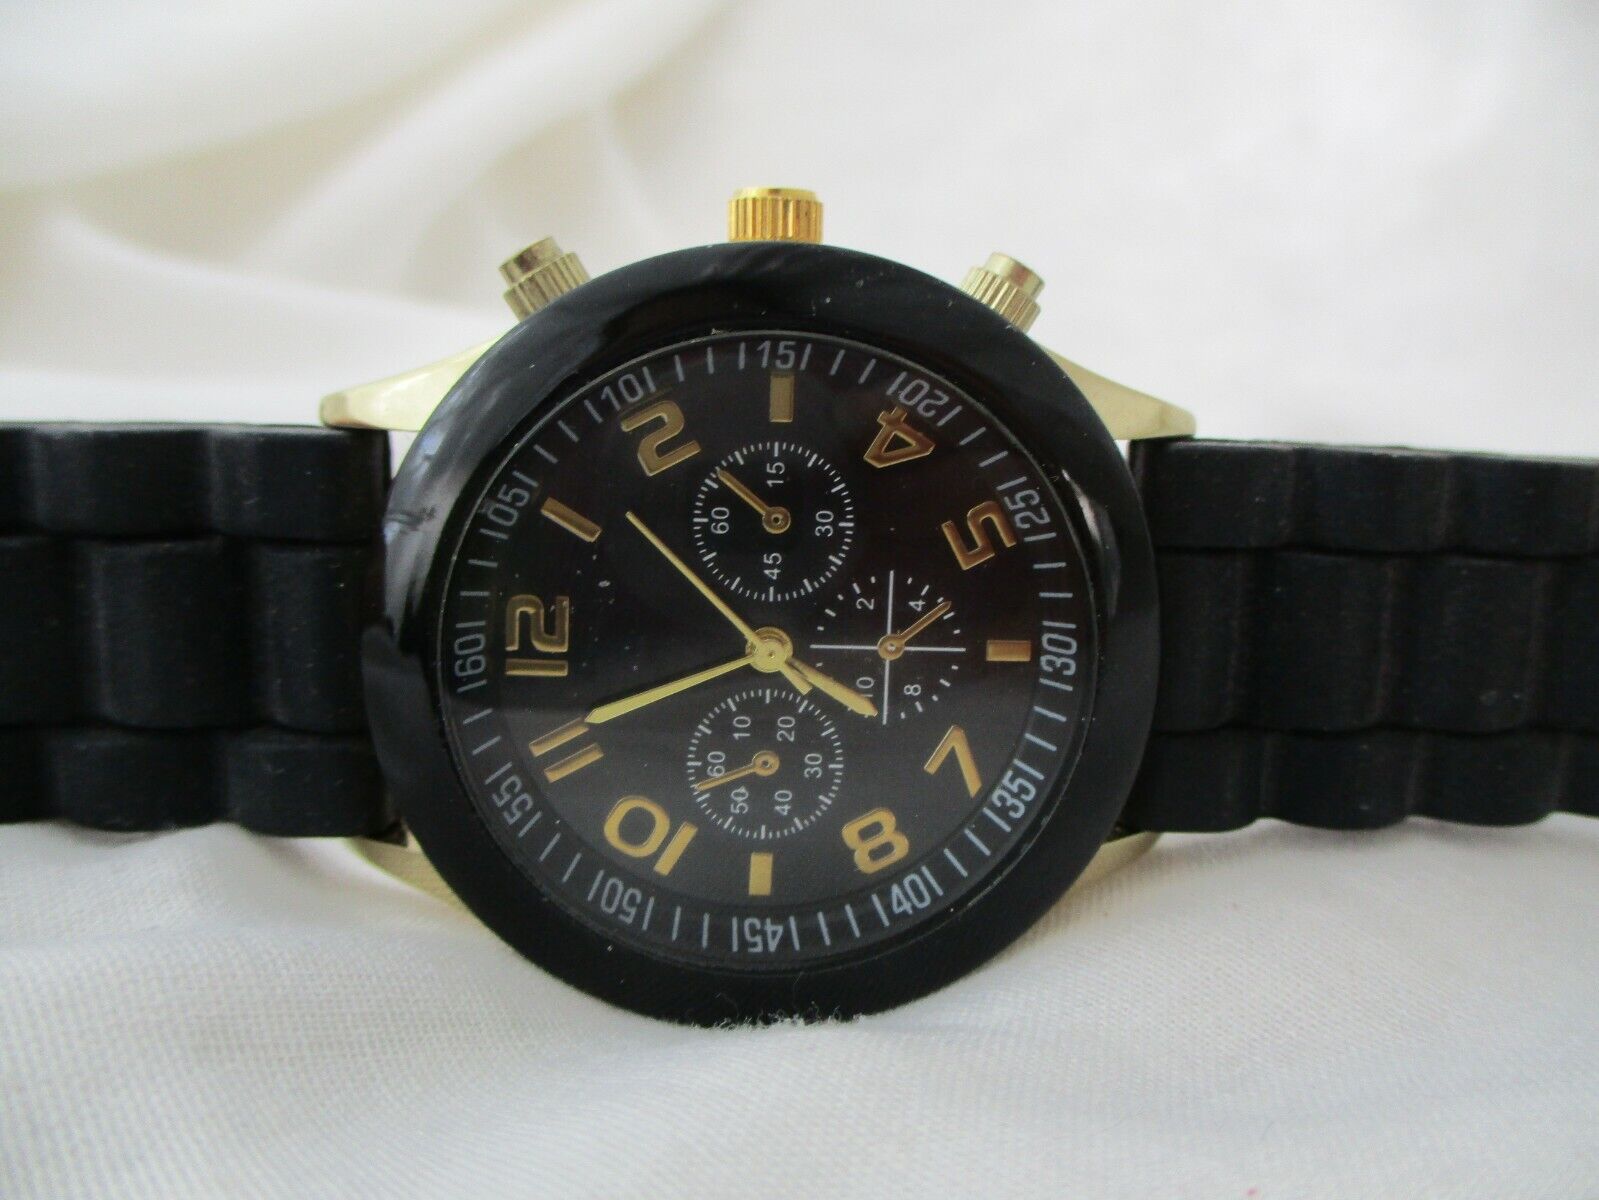 Darice Analog Wristwatch with a Buckle Band